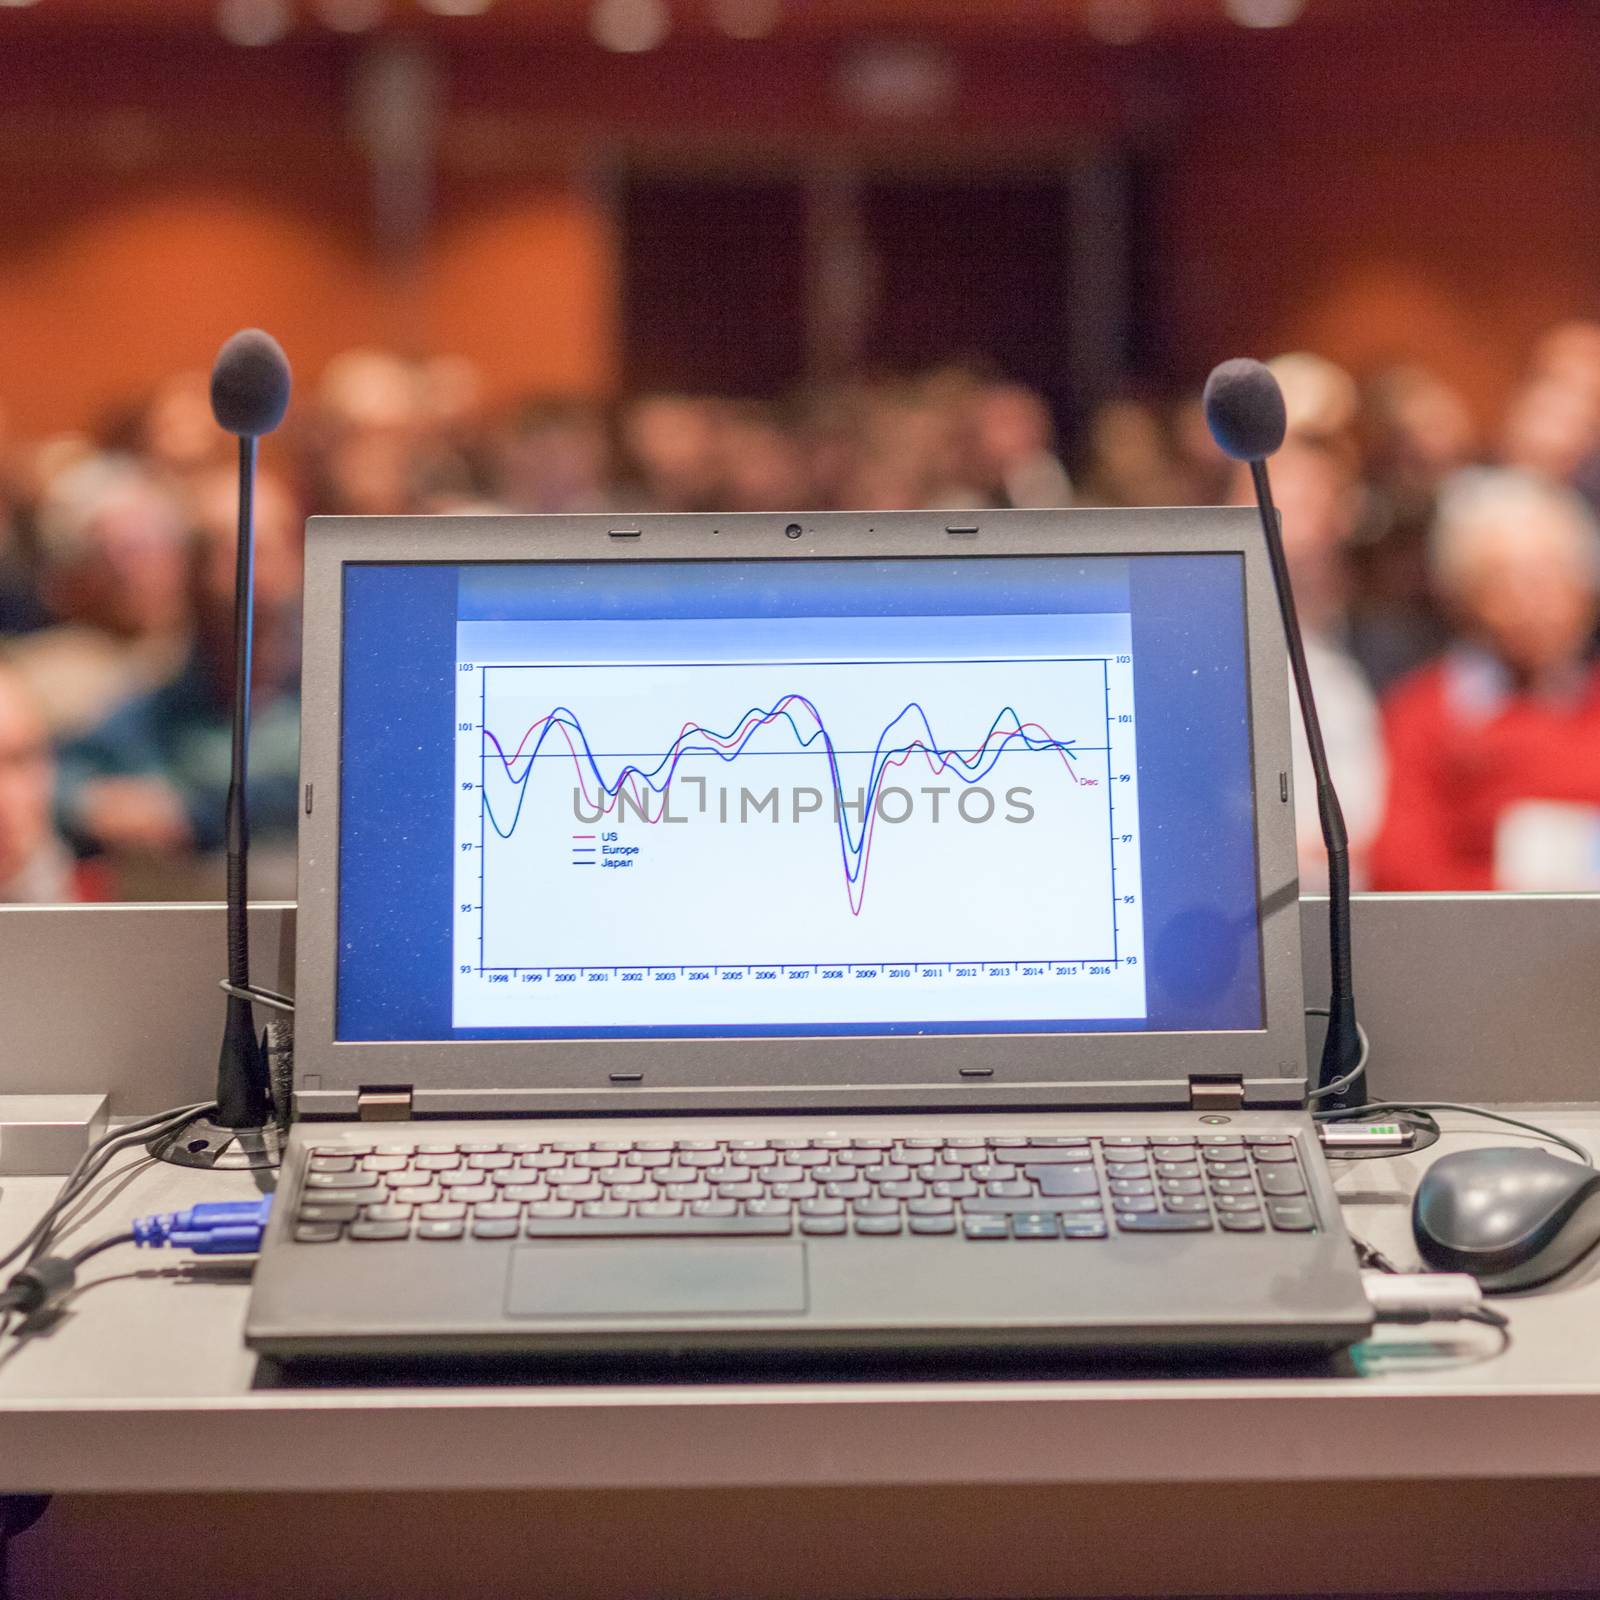 Computer and microphone on rostrum at business event. by kasto